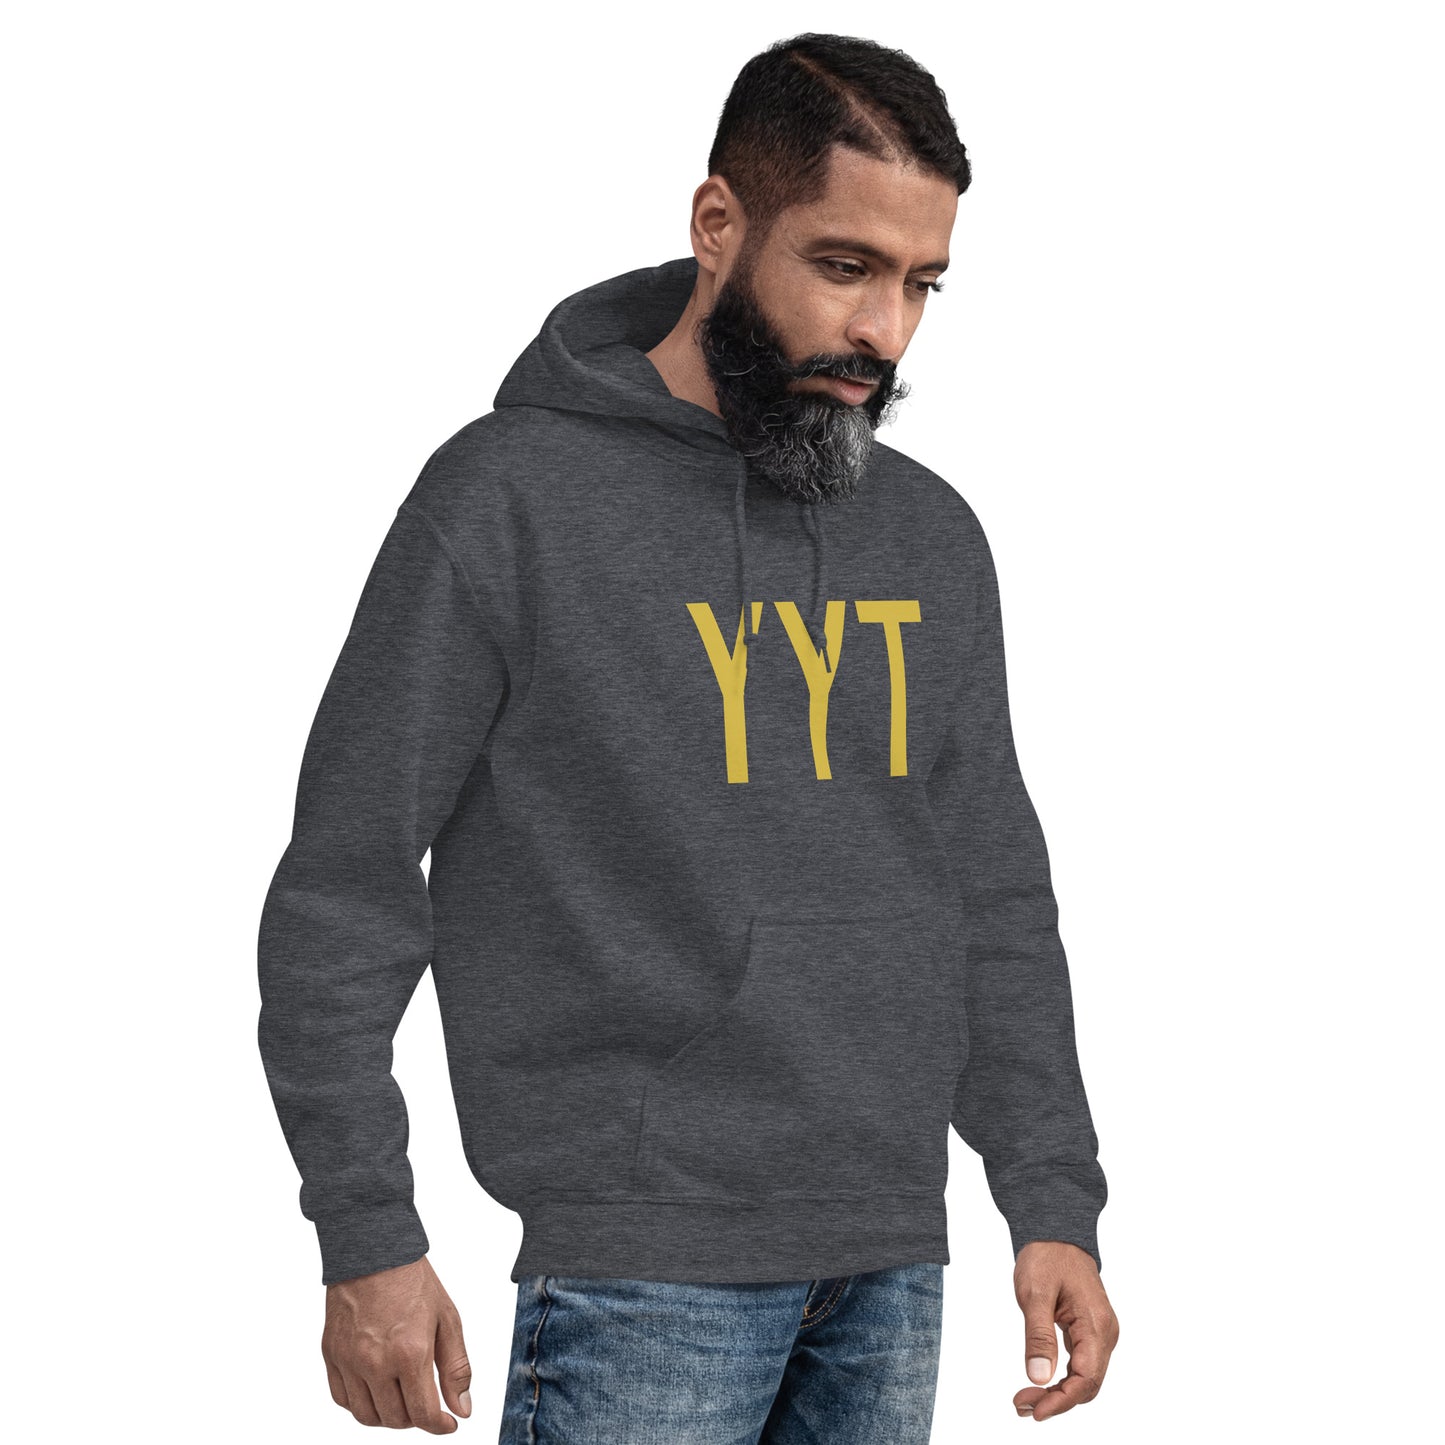 Aviation Gift Unisex Hoodie - Old Gold Graphic • YYT St. John's • YHM Designs - Image 06